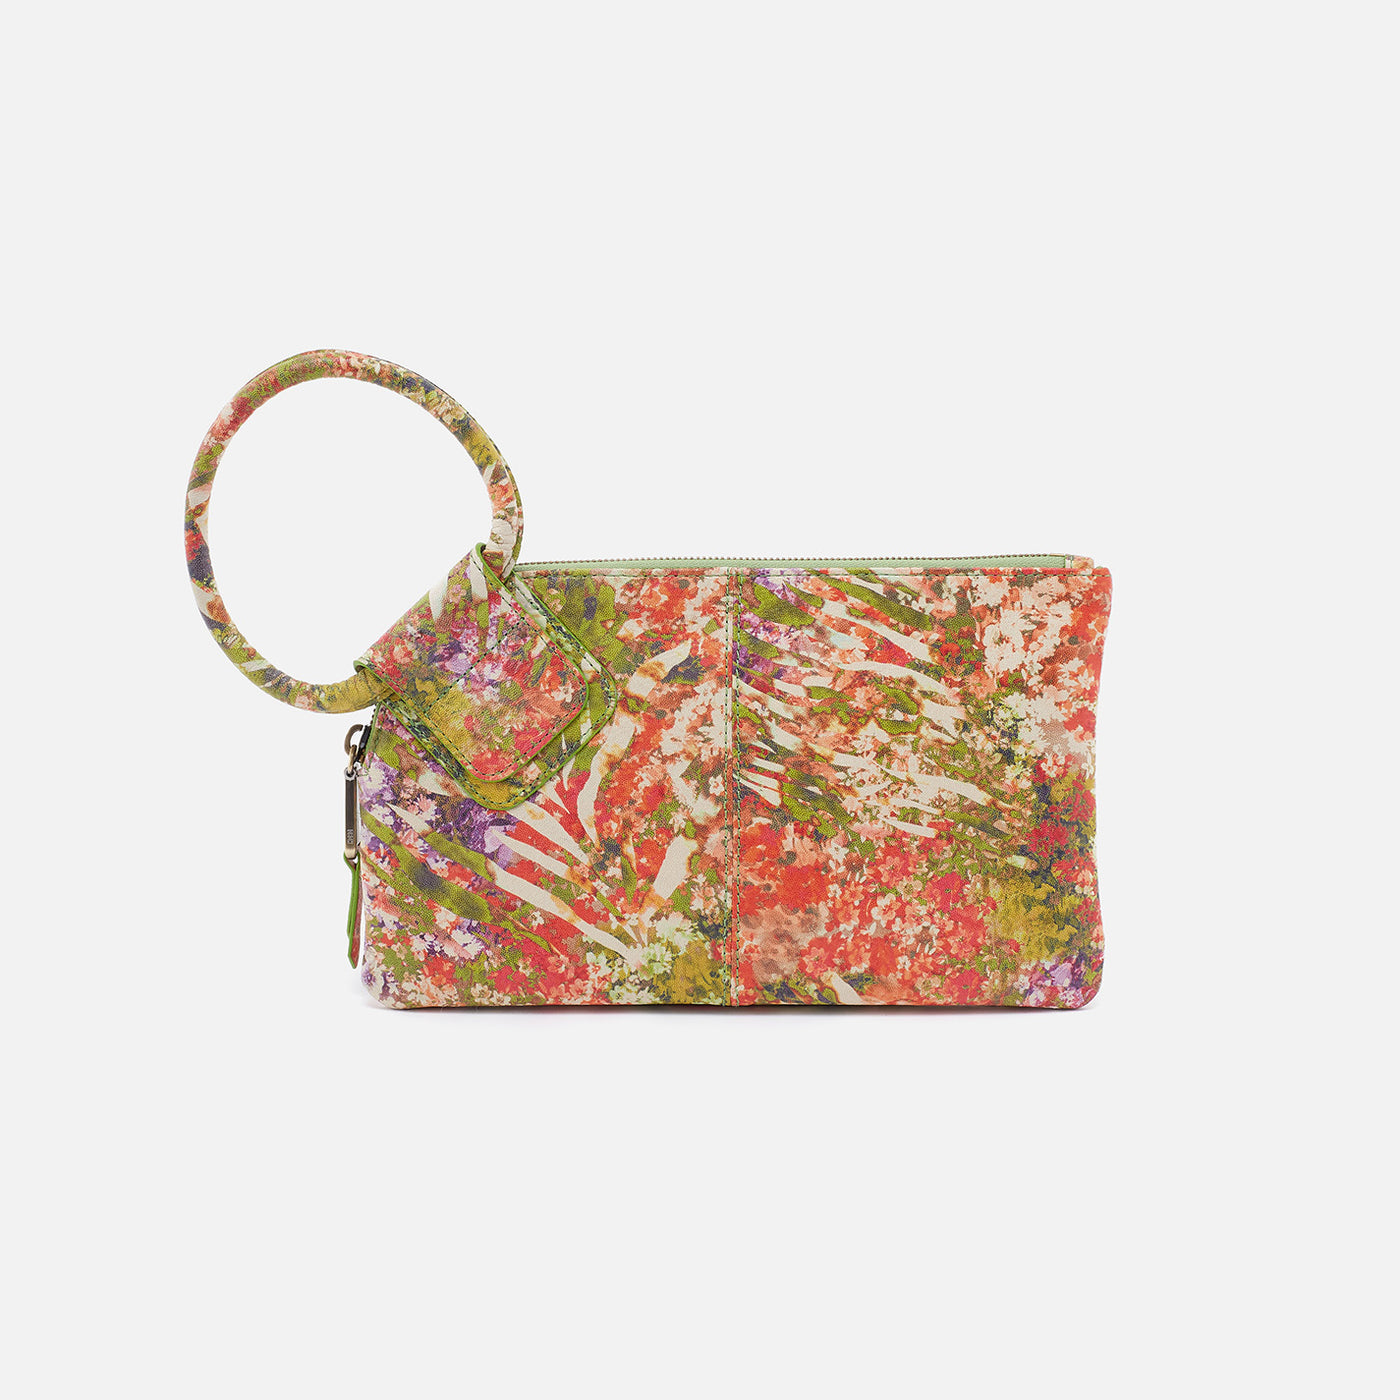 Sable Wristlet in Printed Leather - Tropic Print